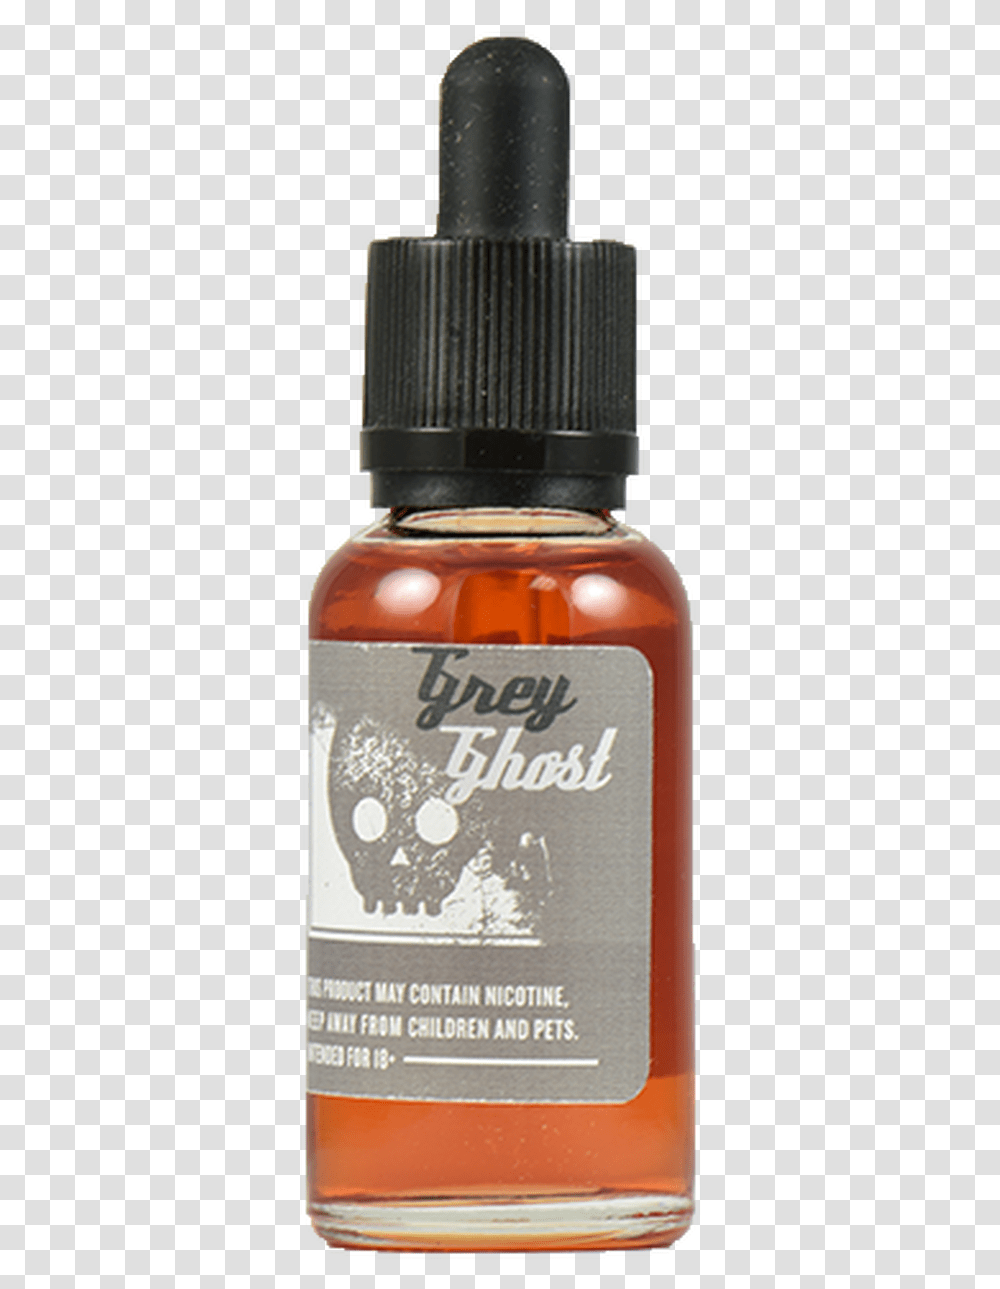 Grey Ghost Cosmetics, Bottle, Label, Shampoo Transparent Png